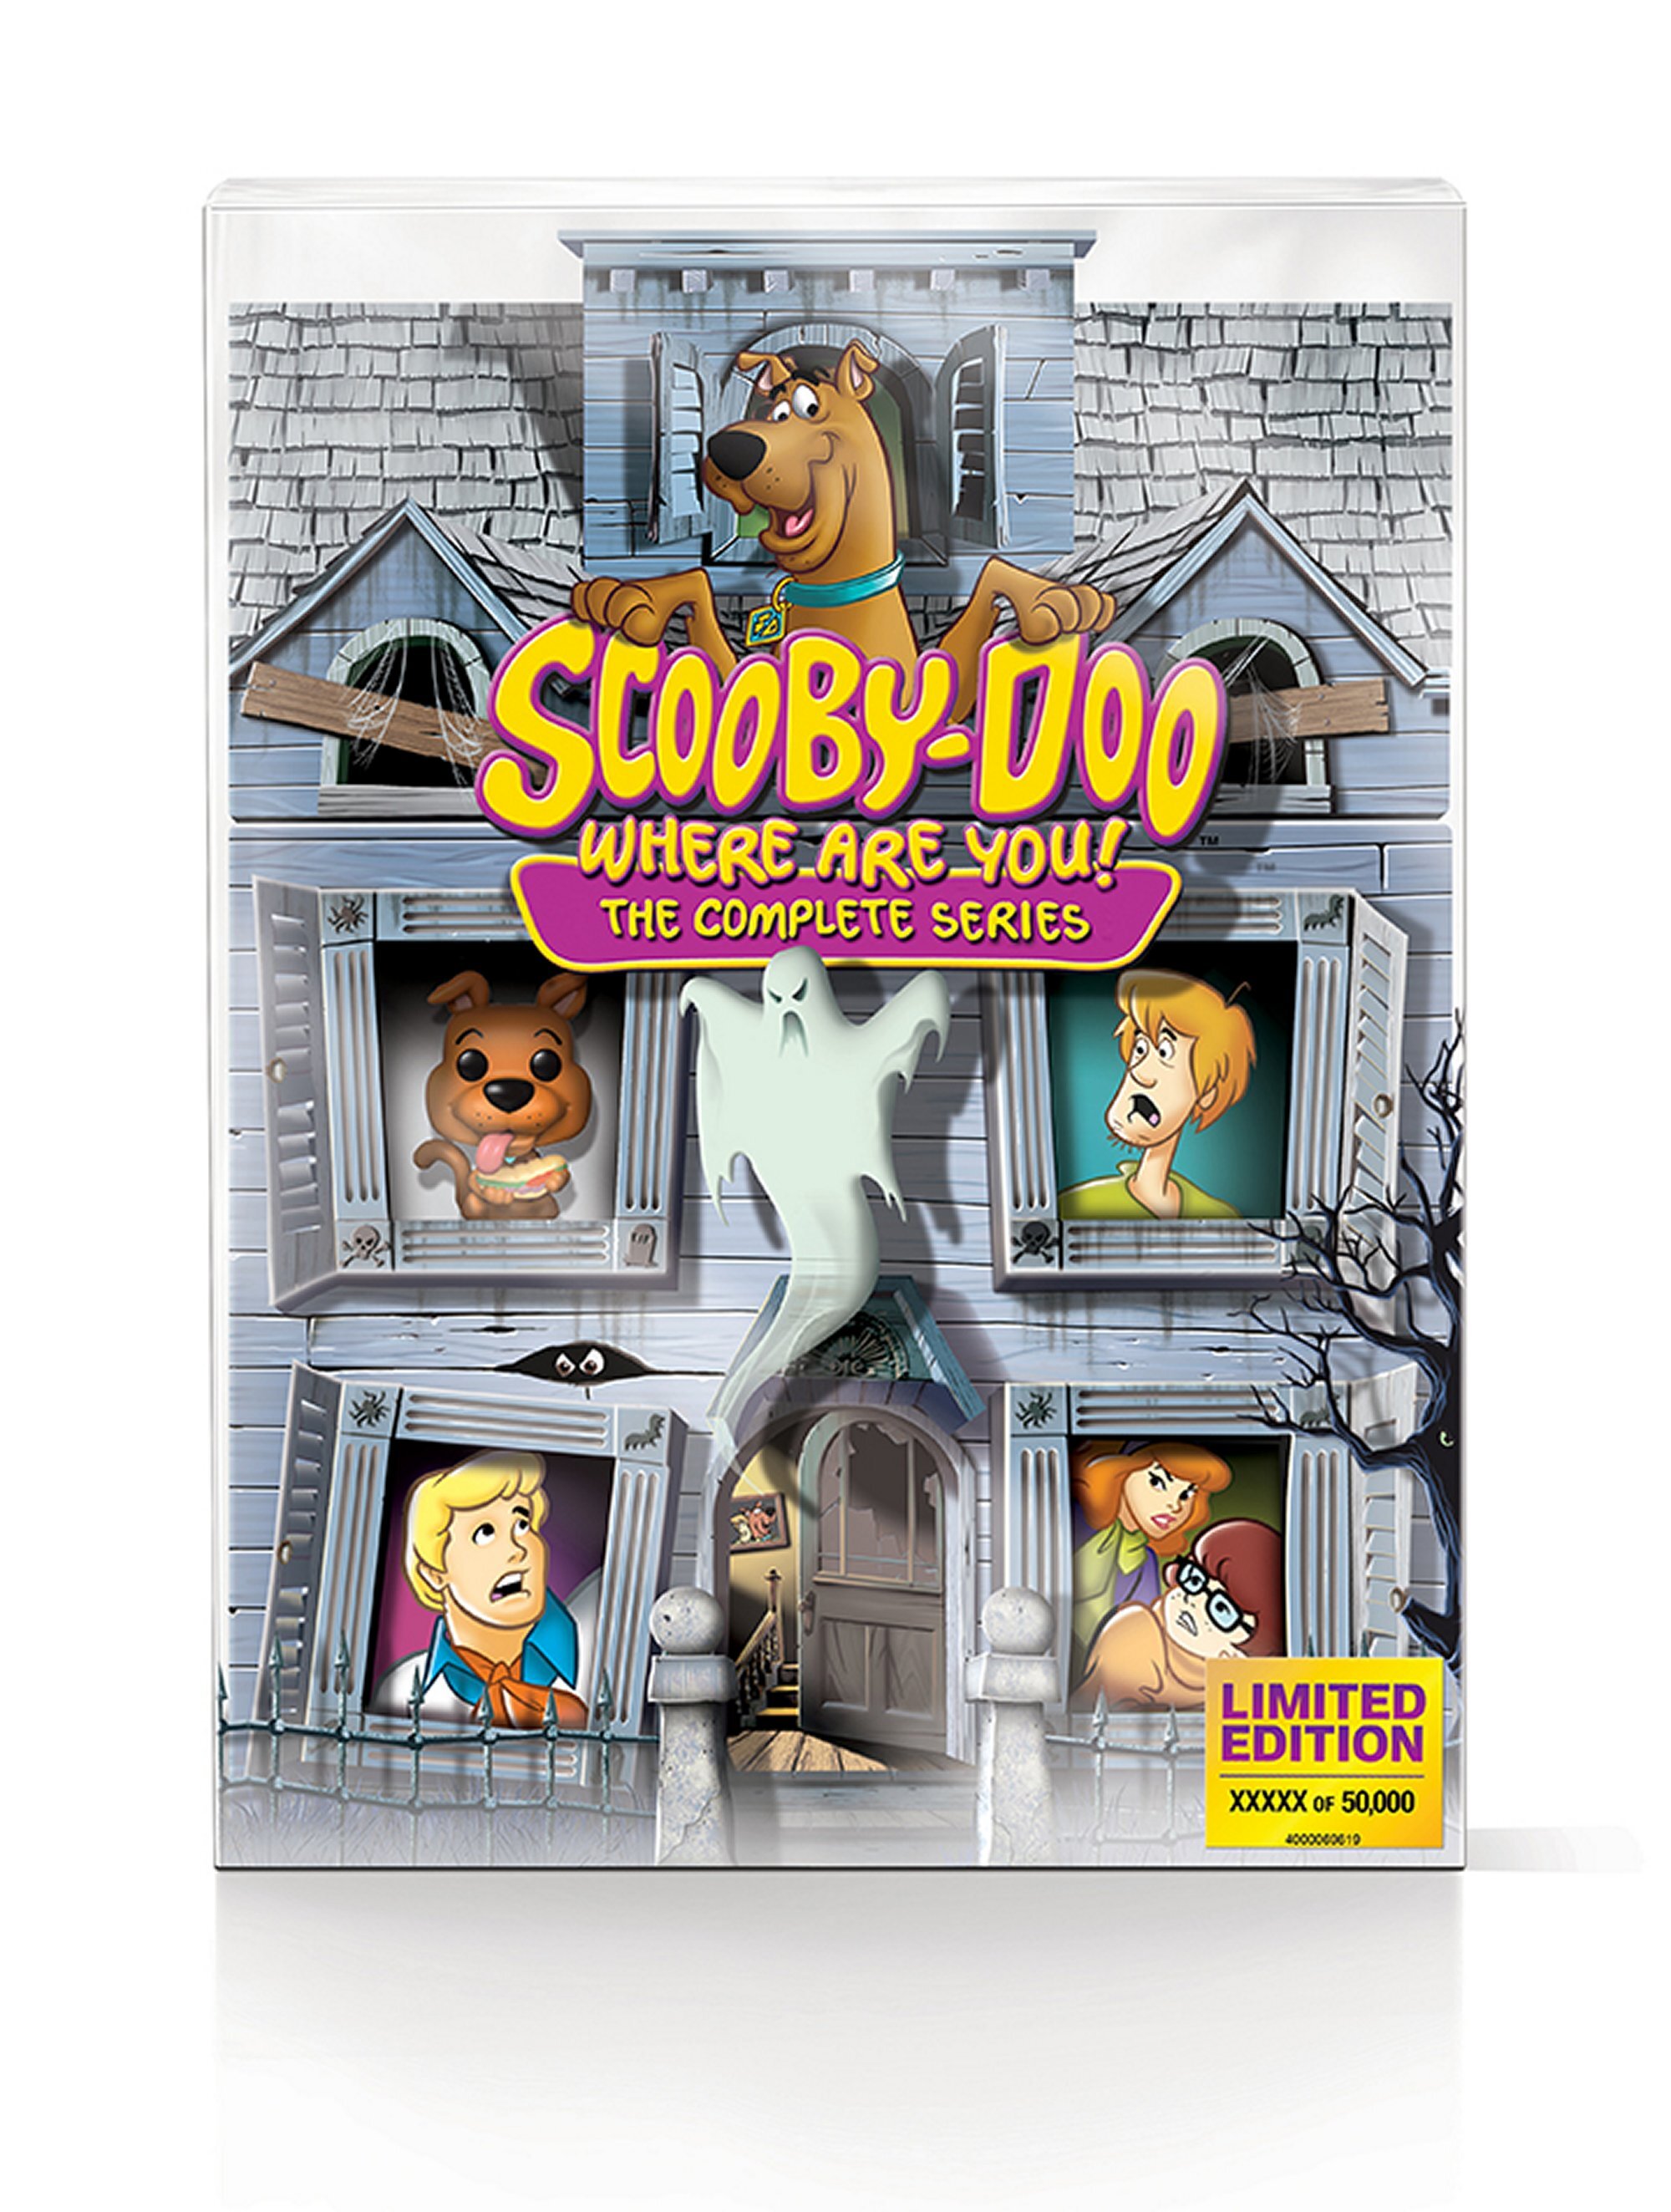 Scooby-Doo, Where Are You!: The Complete Series (Limited Edition Box Set) - Blu-ray [ 1978 ]  - Children Movies On Blu-ray - Movies On GRUV